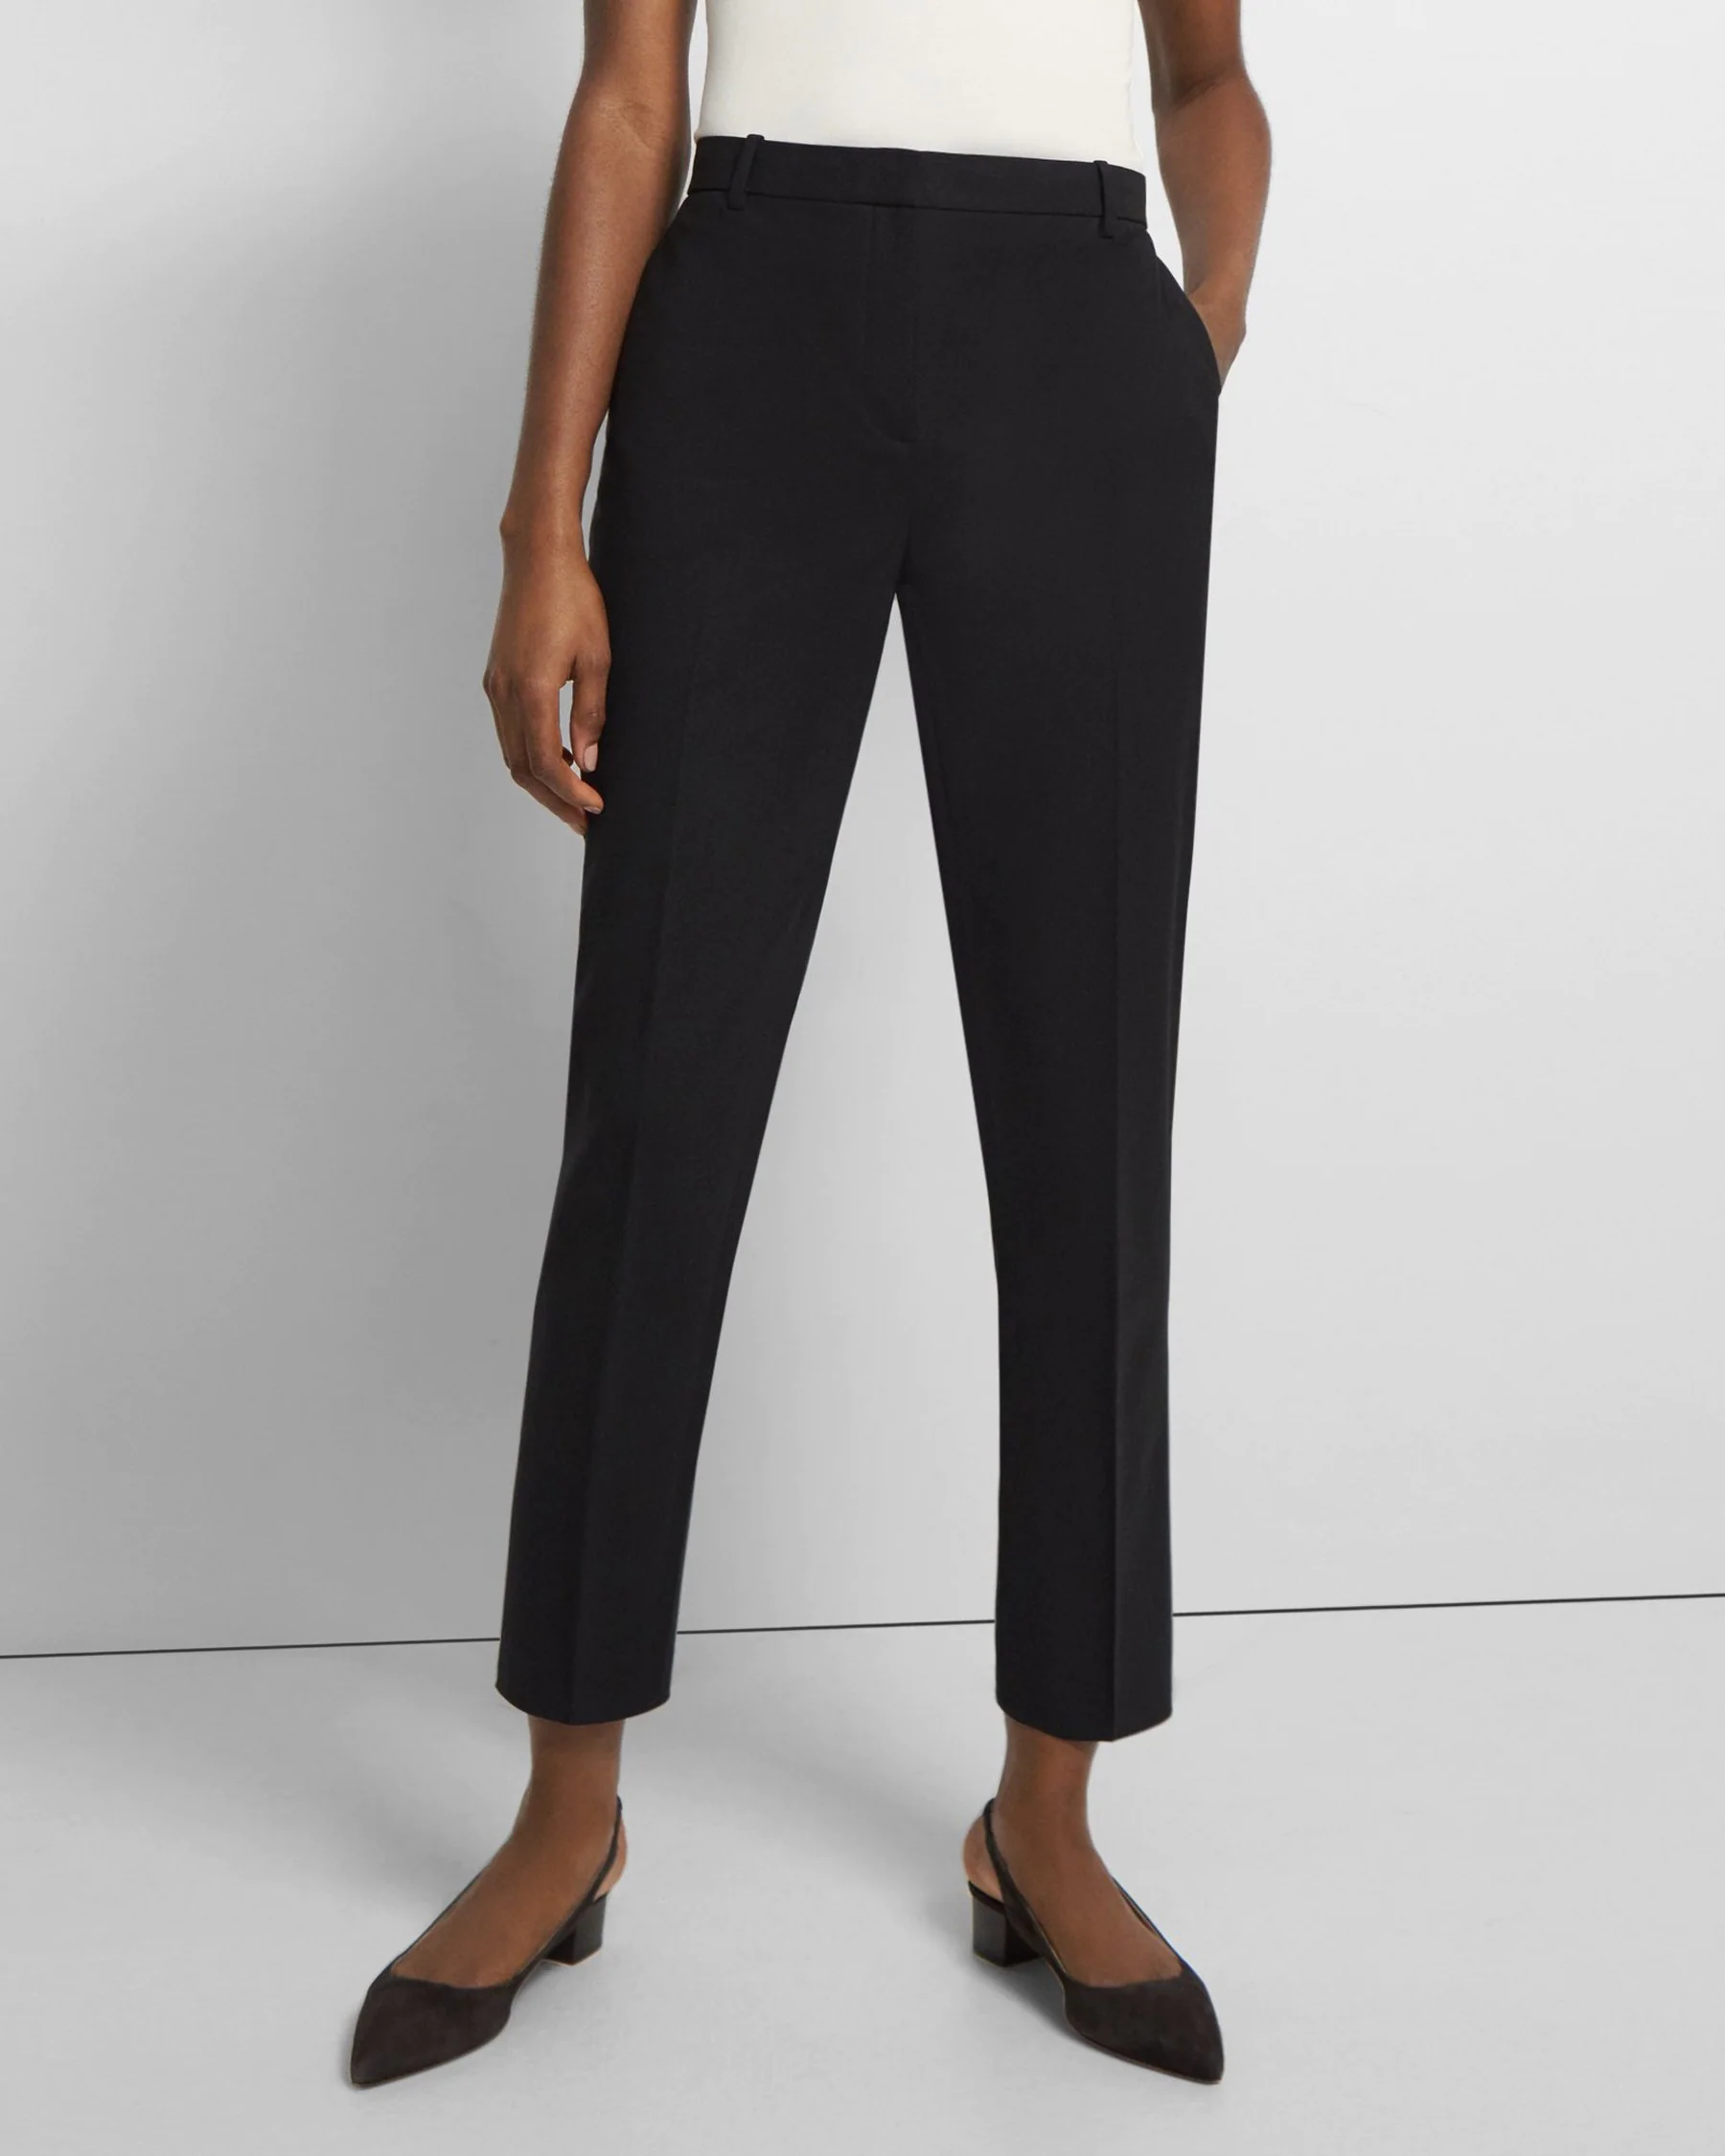 Wide-Leg Trousers Four Ways for Work - Pumps & Push Ups | Petite work  outfits, Smart casual work outfit, Business casual outfits for work